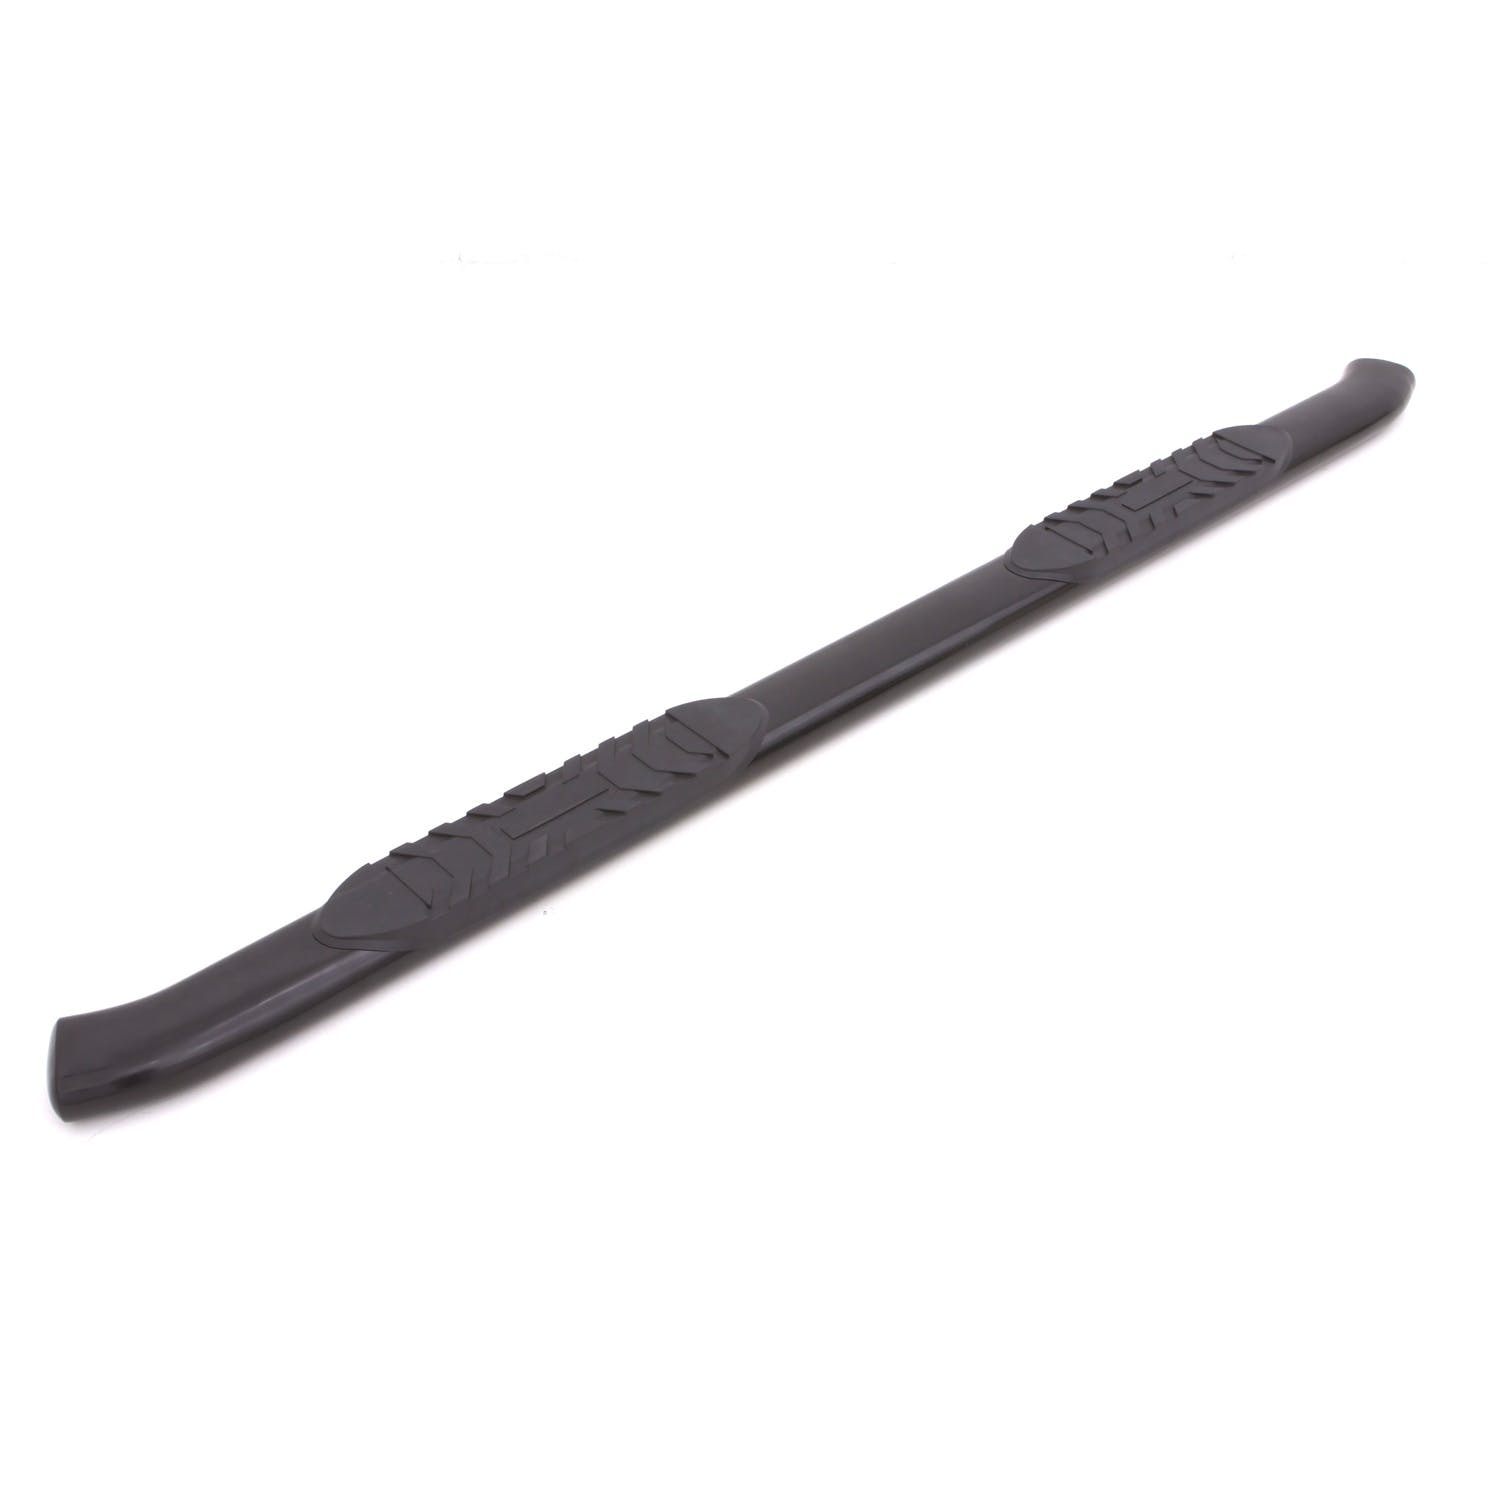 LUND 23850007 5 Inch Oval Curved Nerf Bar - Black 5 In OVAL CURVED STEEL